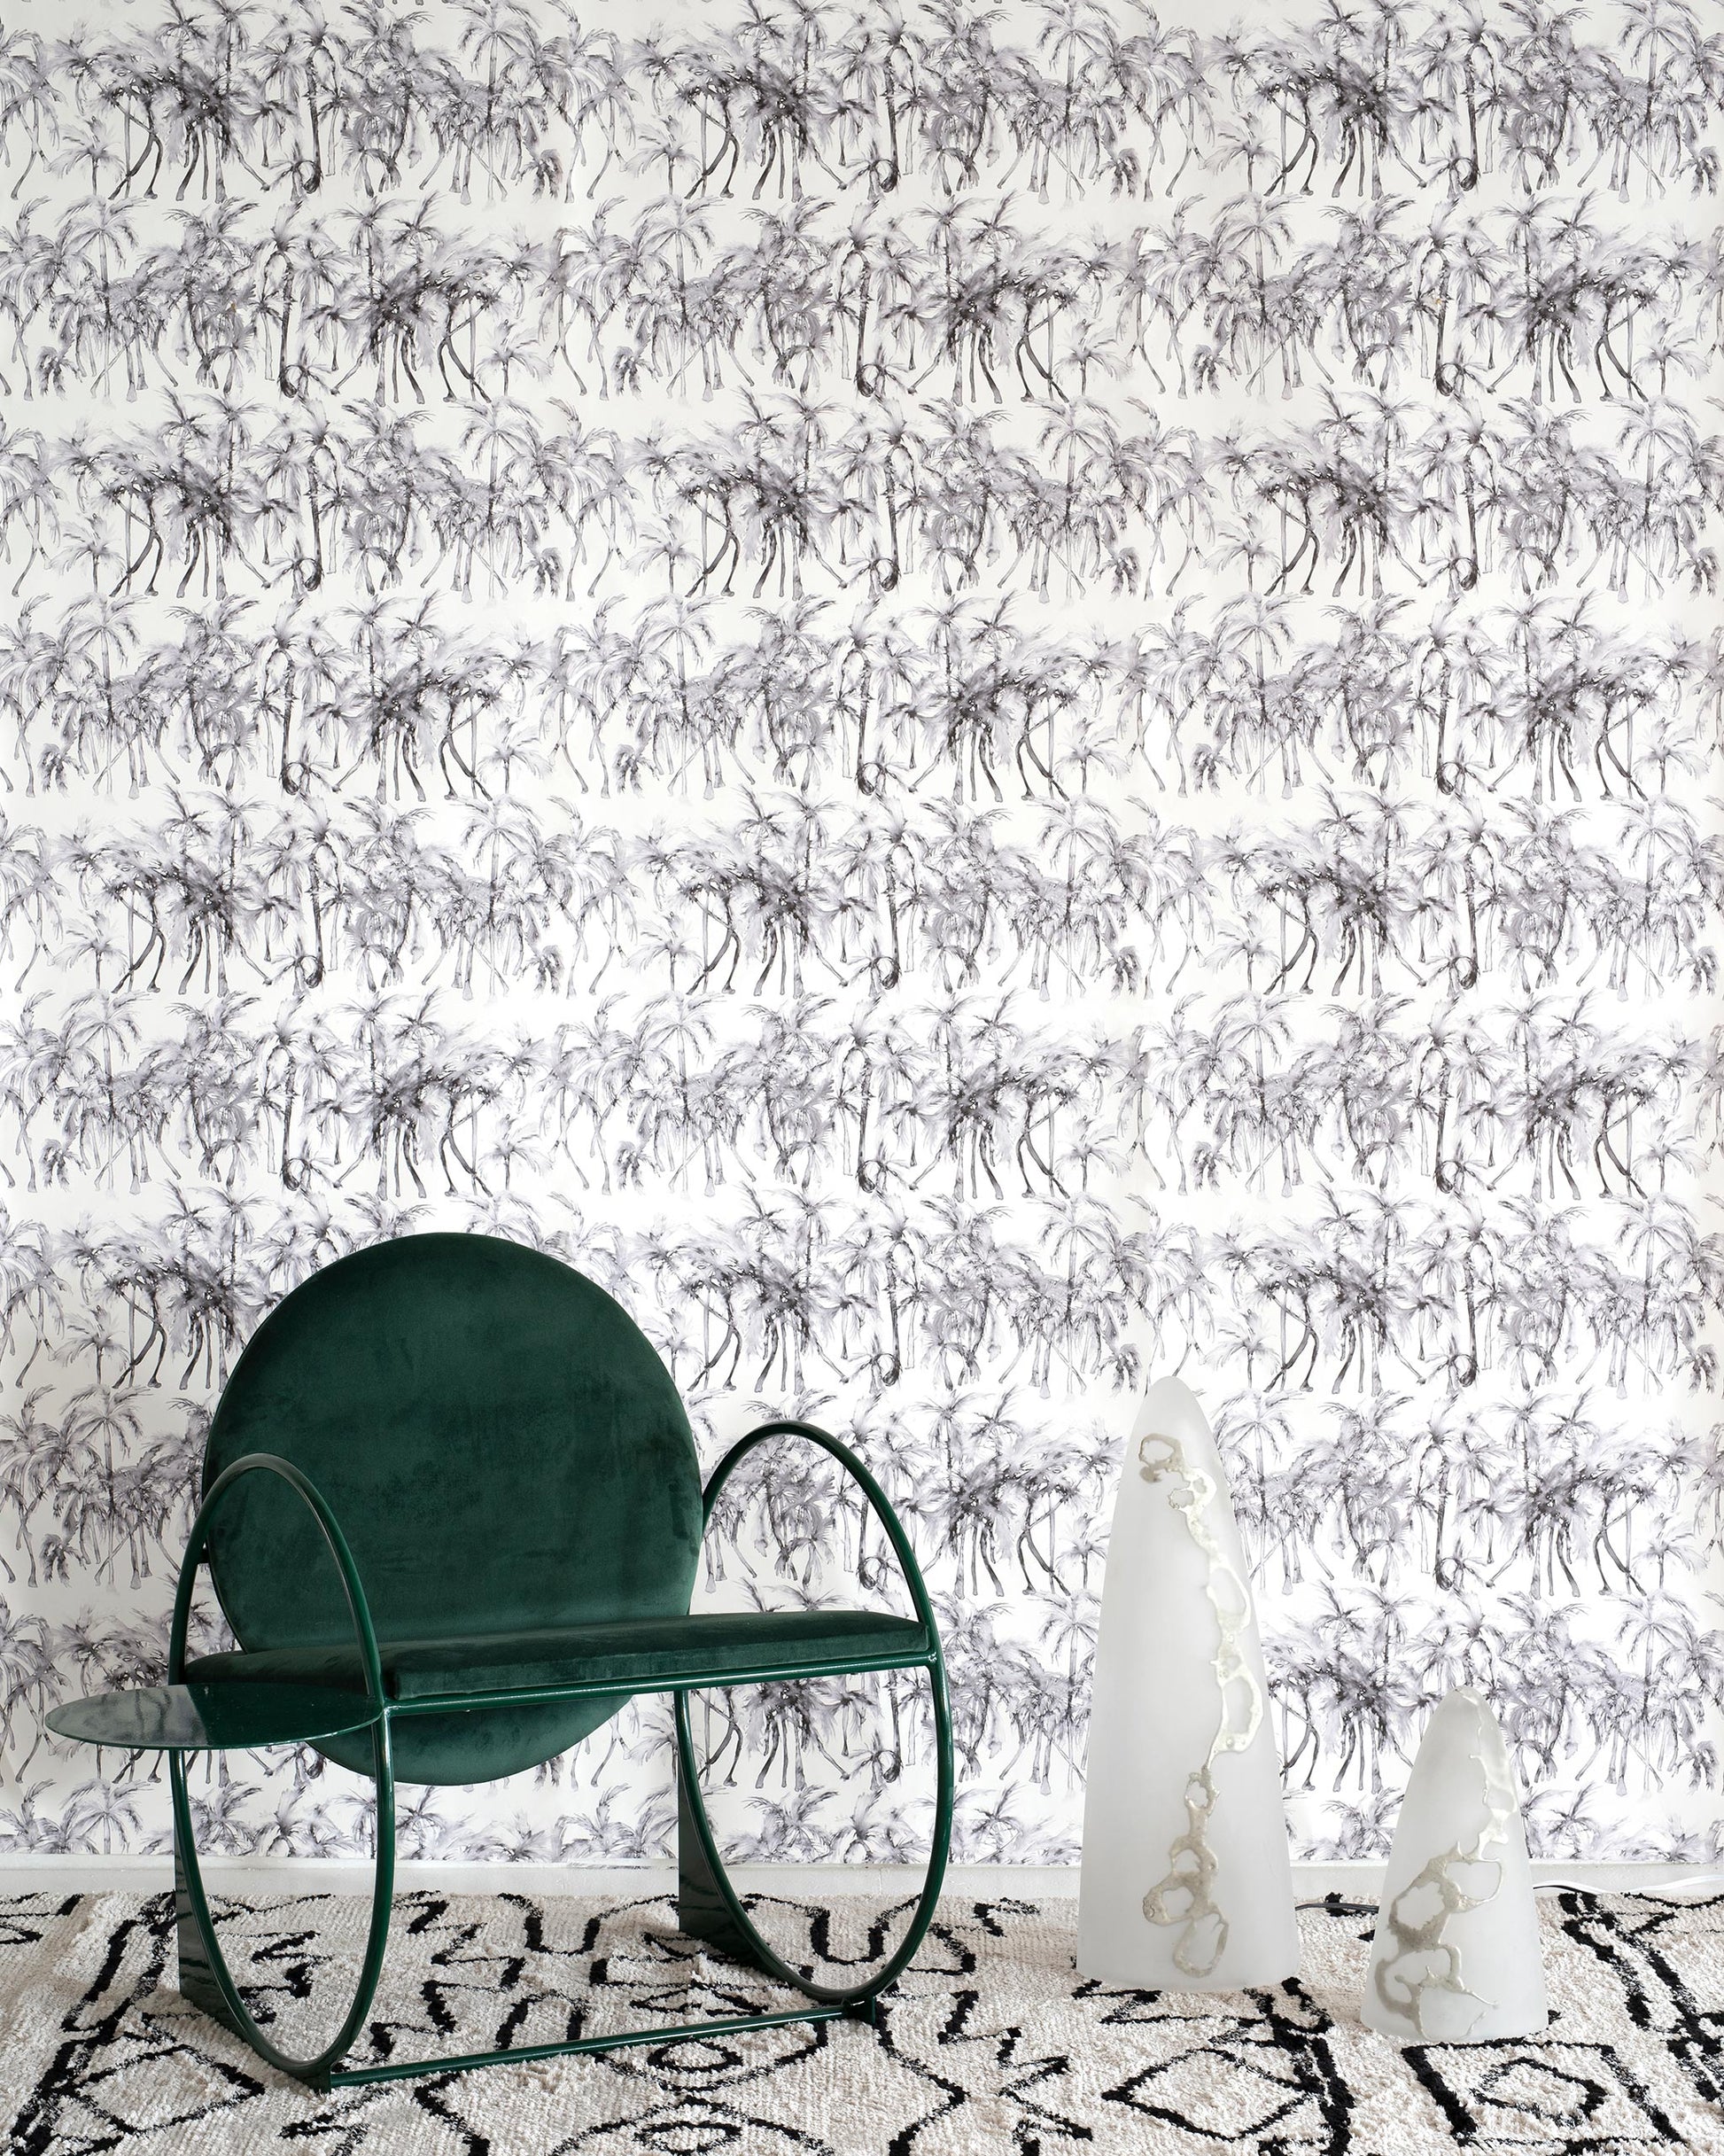 A black and white Palm Dance Wallpaper||Shadow pattern in front of a green rocking chair.